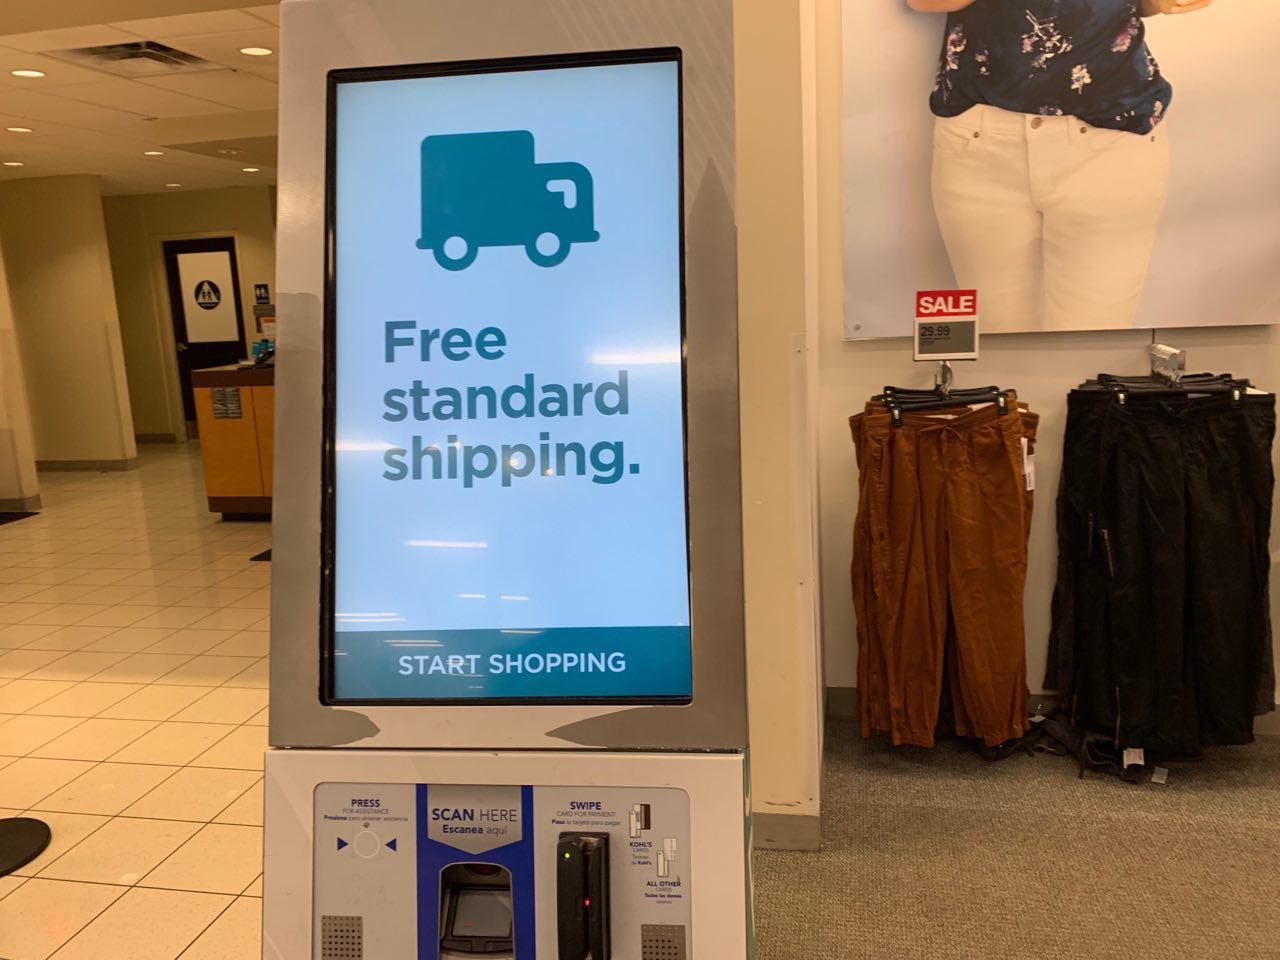 Kohl's Free Shipping Offer